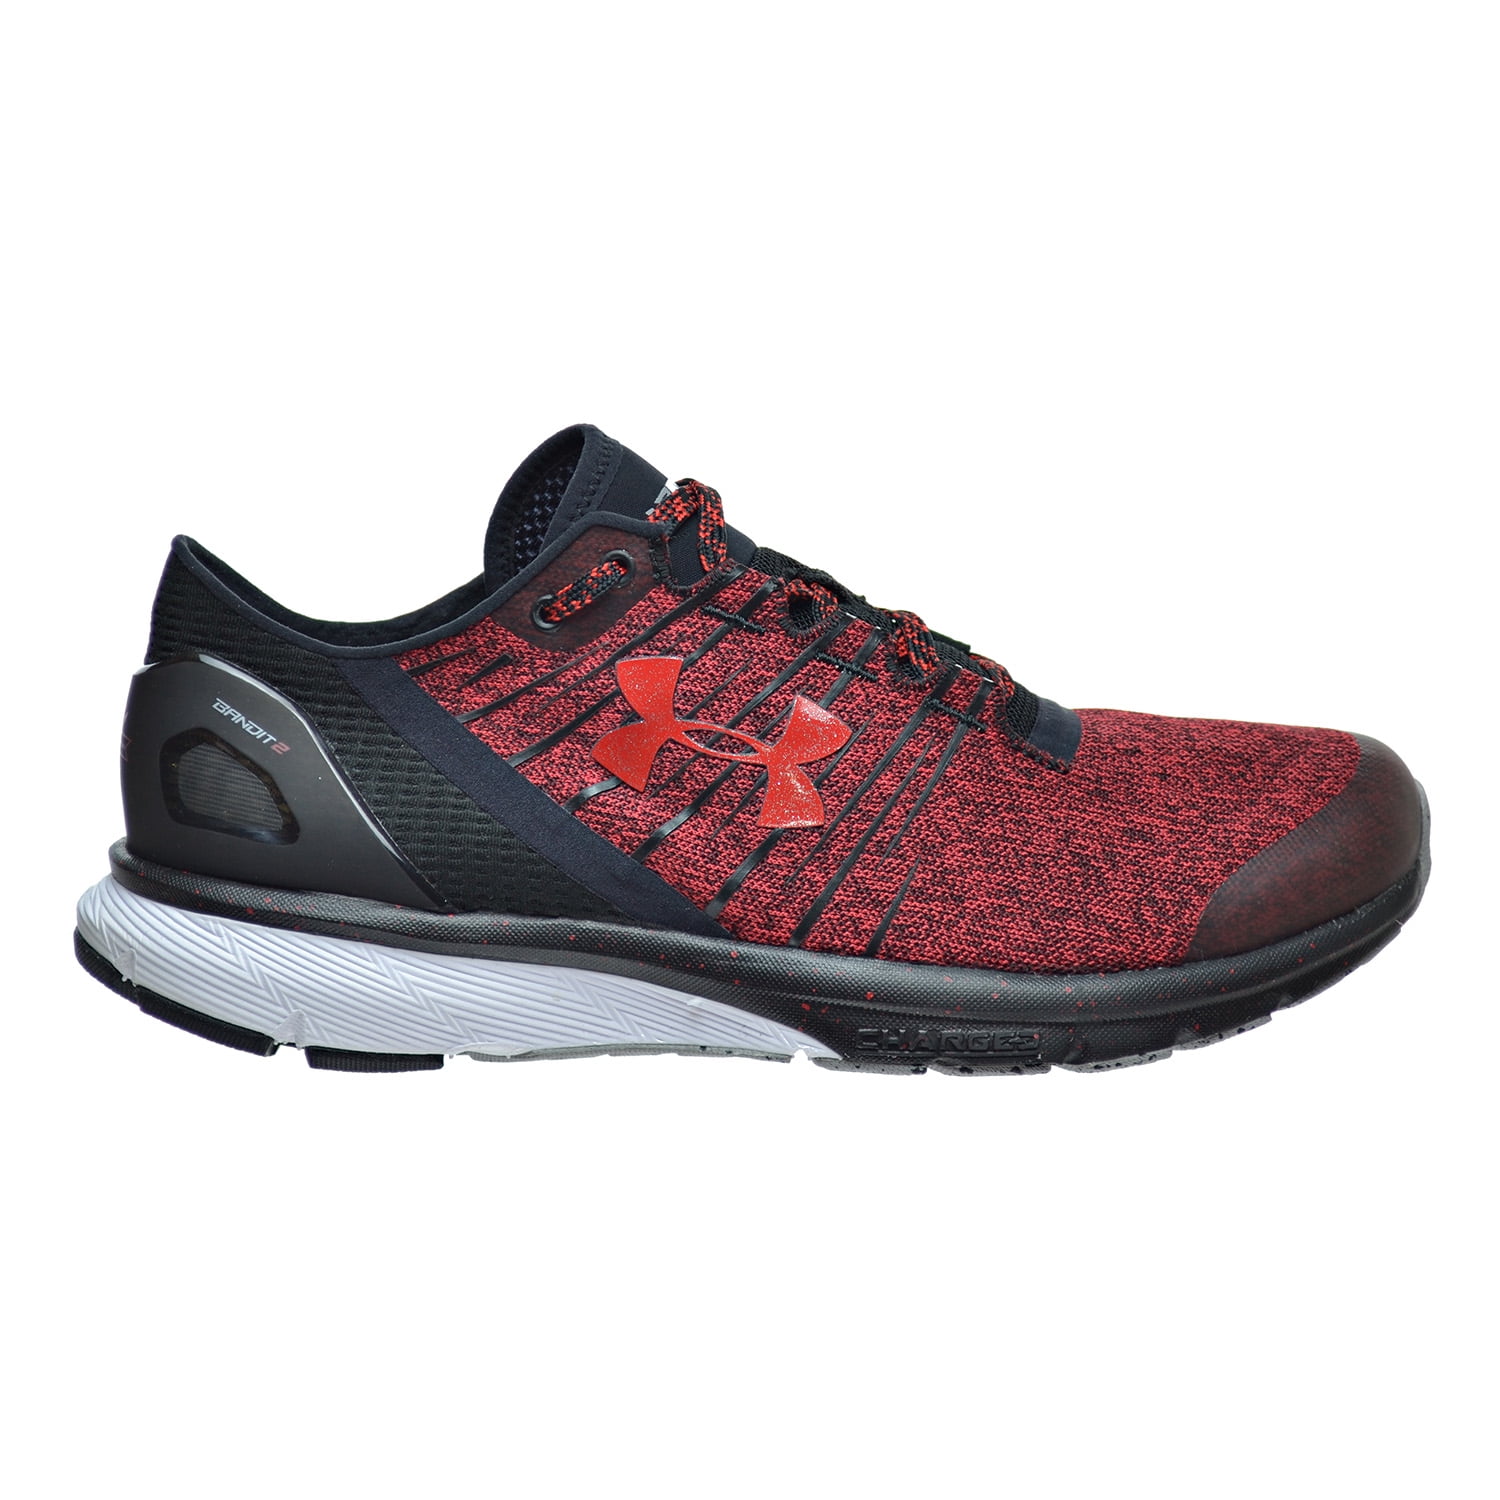 Under Armour Men's Charged Bandit 2 Running Shoe 